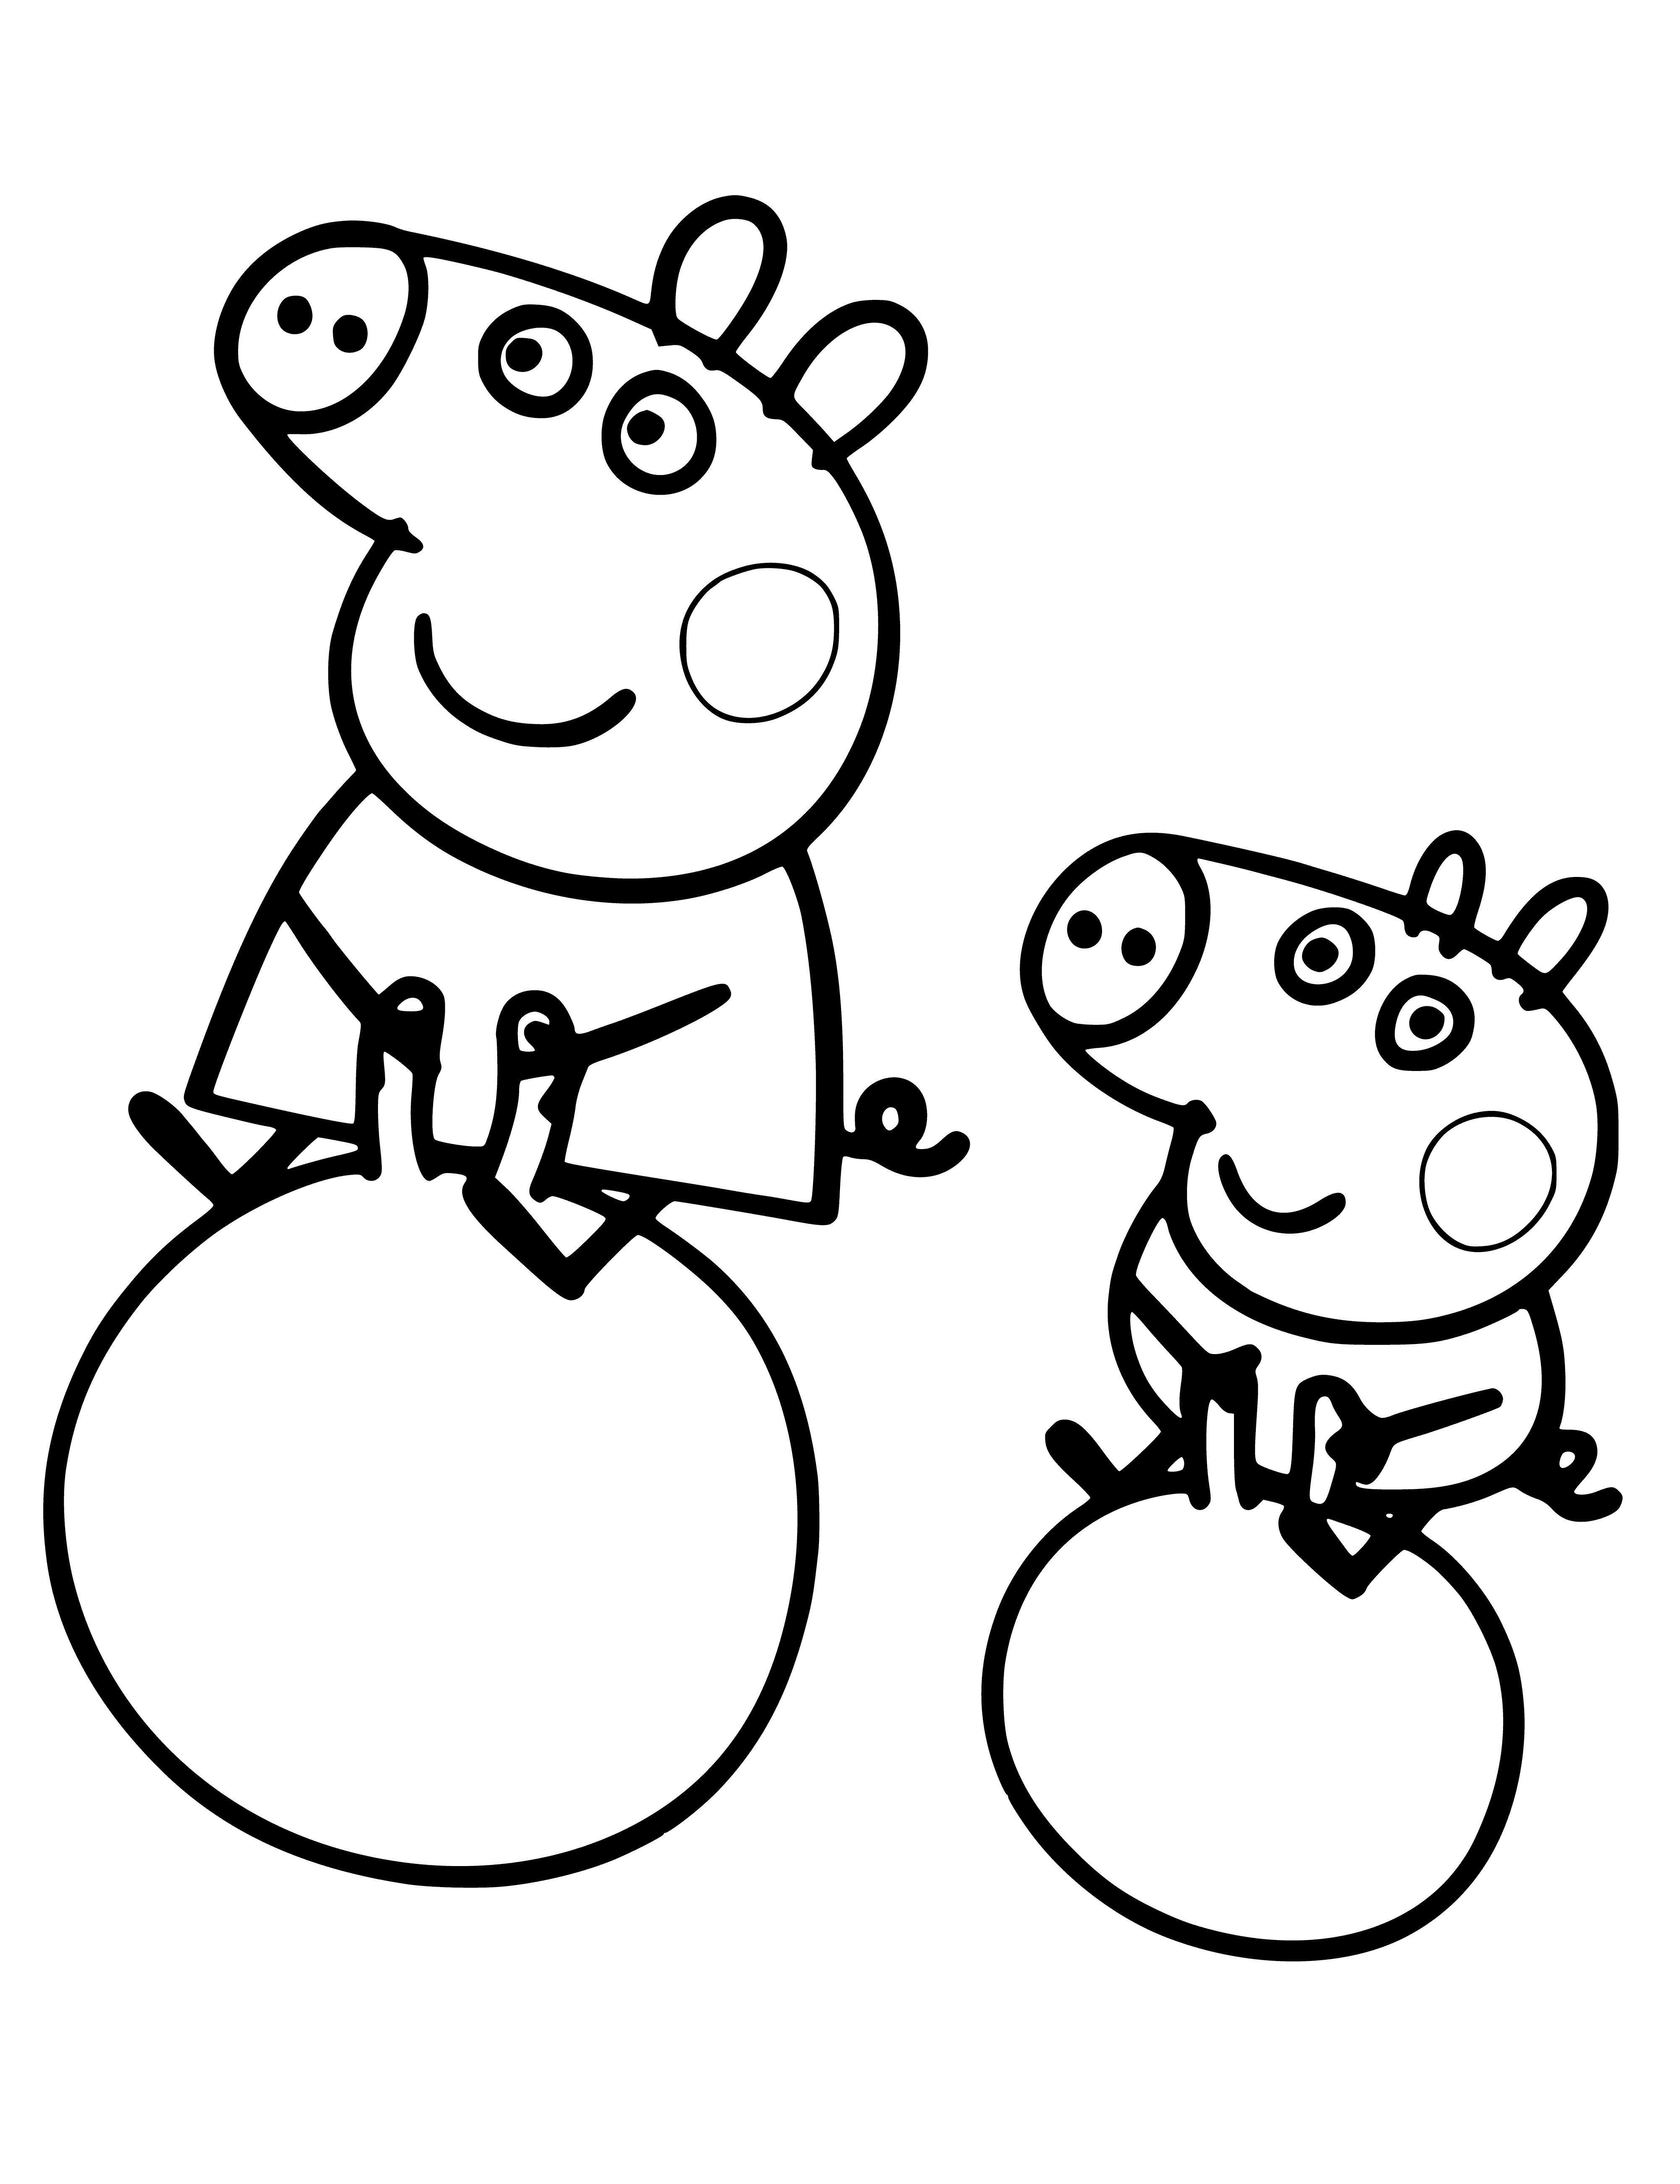 Peppa and George on gymnastic balls coloring page